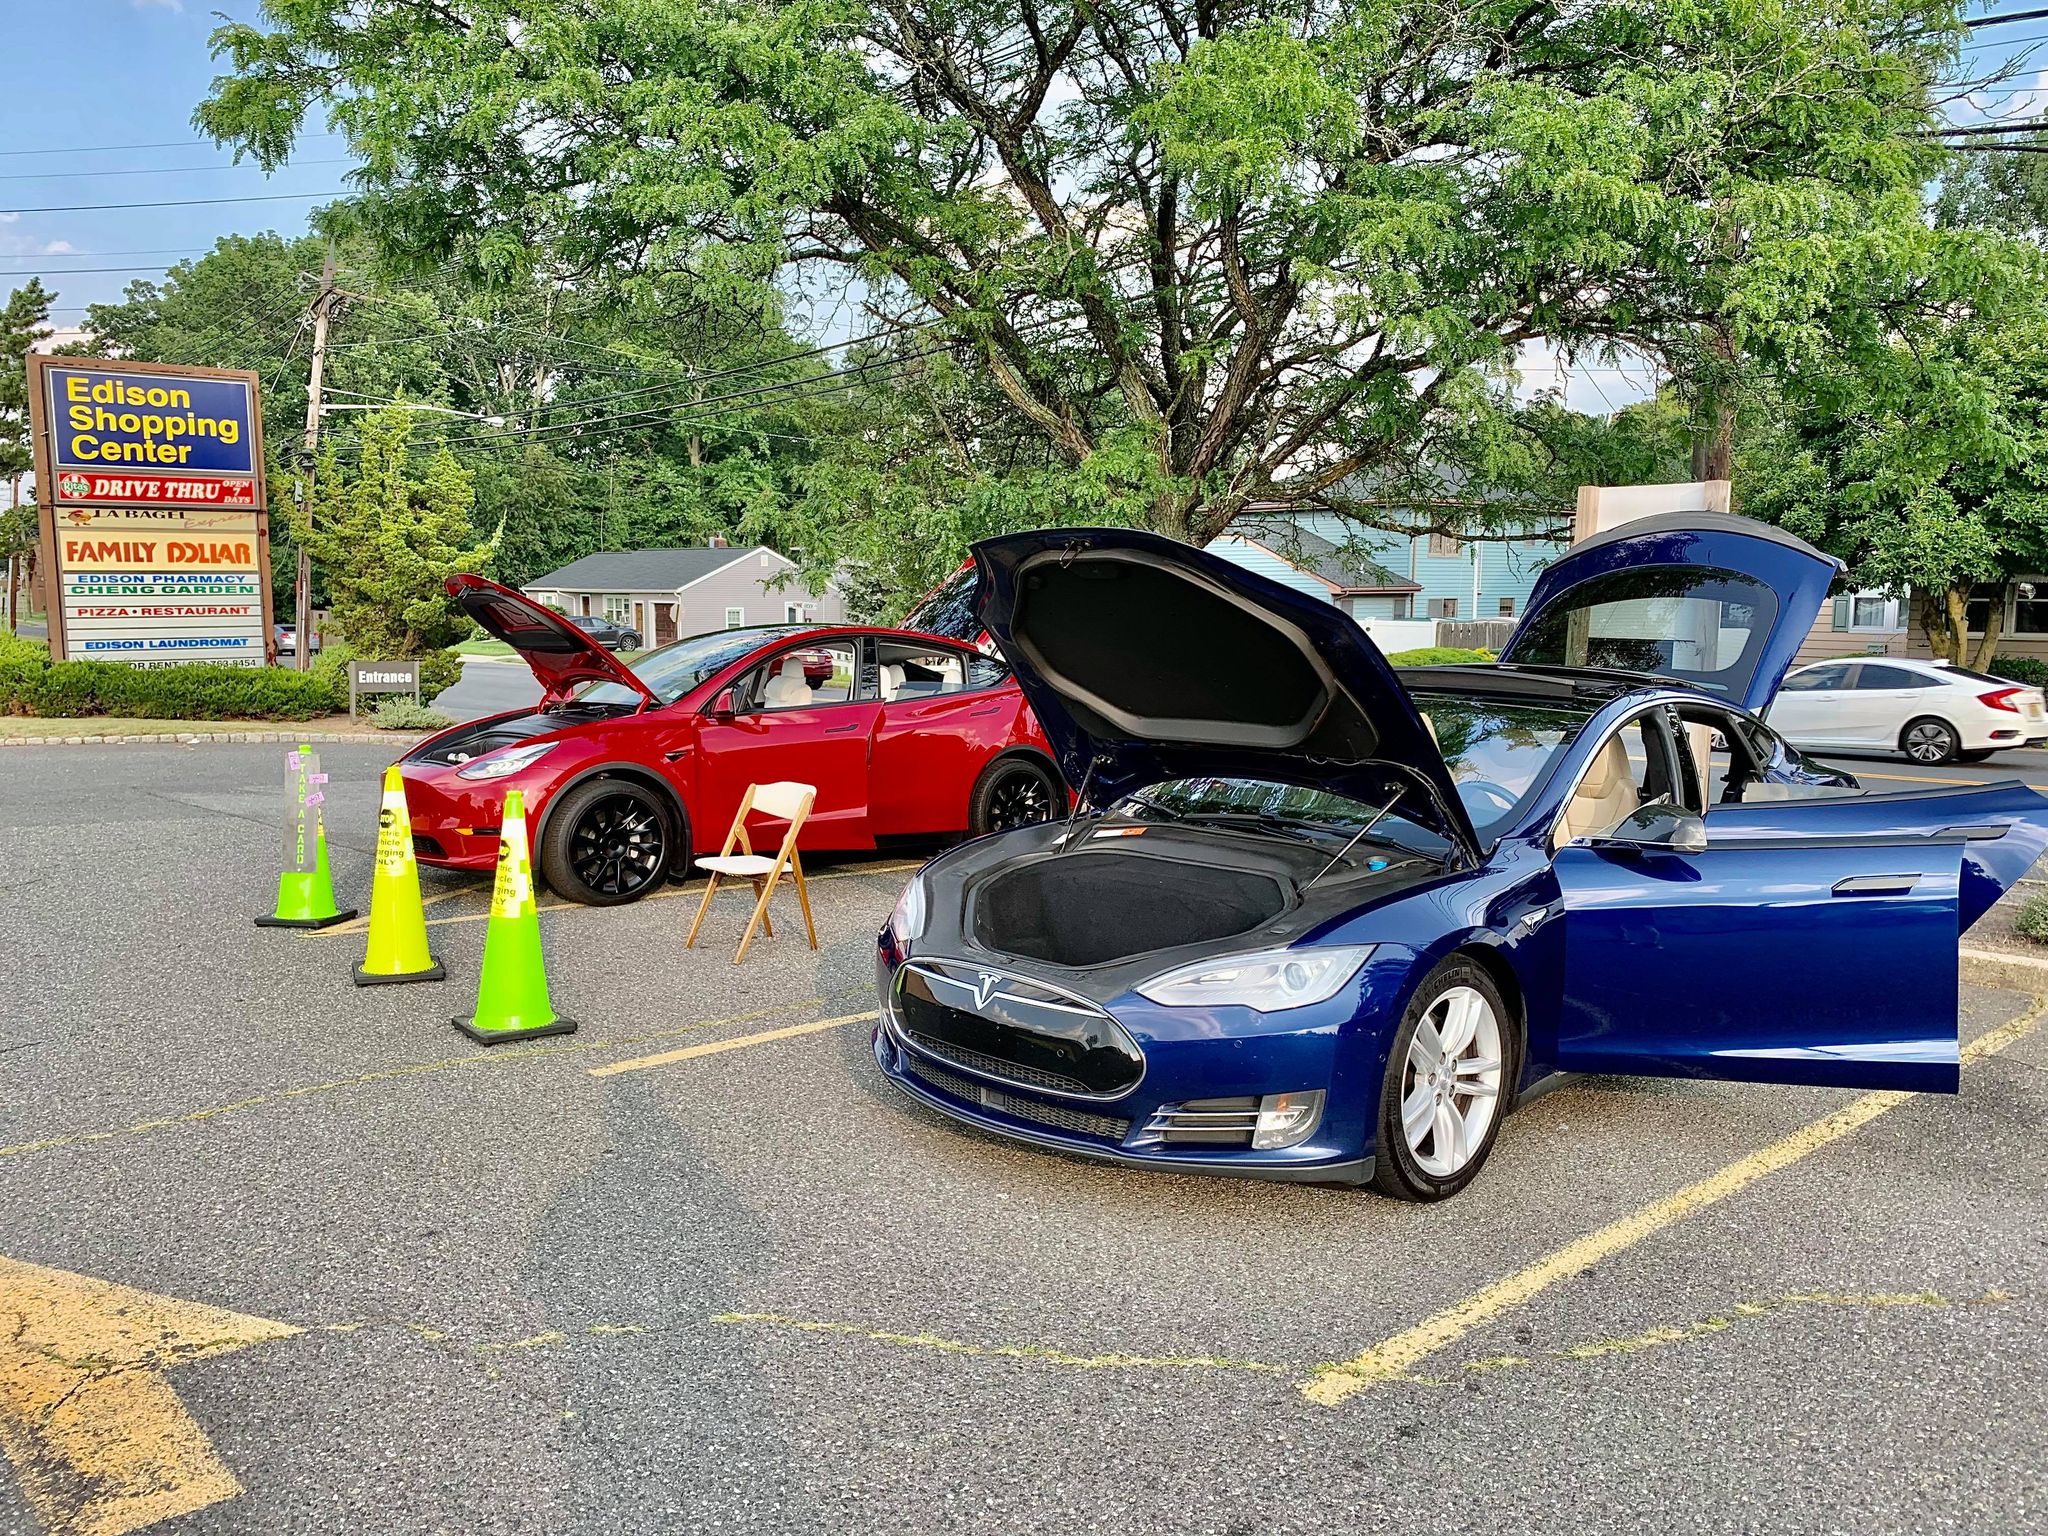 Edison Shopping Center, 2303 Woodbridge Ave CR-514 in Edison NJ) Wed Nights 5:30pm to 8:30pm Where the only Rita's Drive through is,  Come get a Rita's and check out the cars!